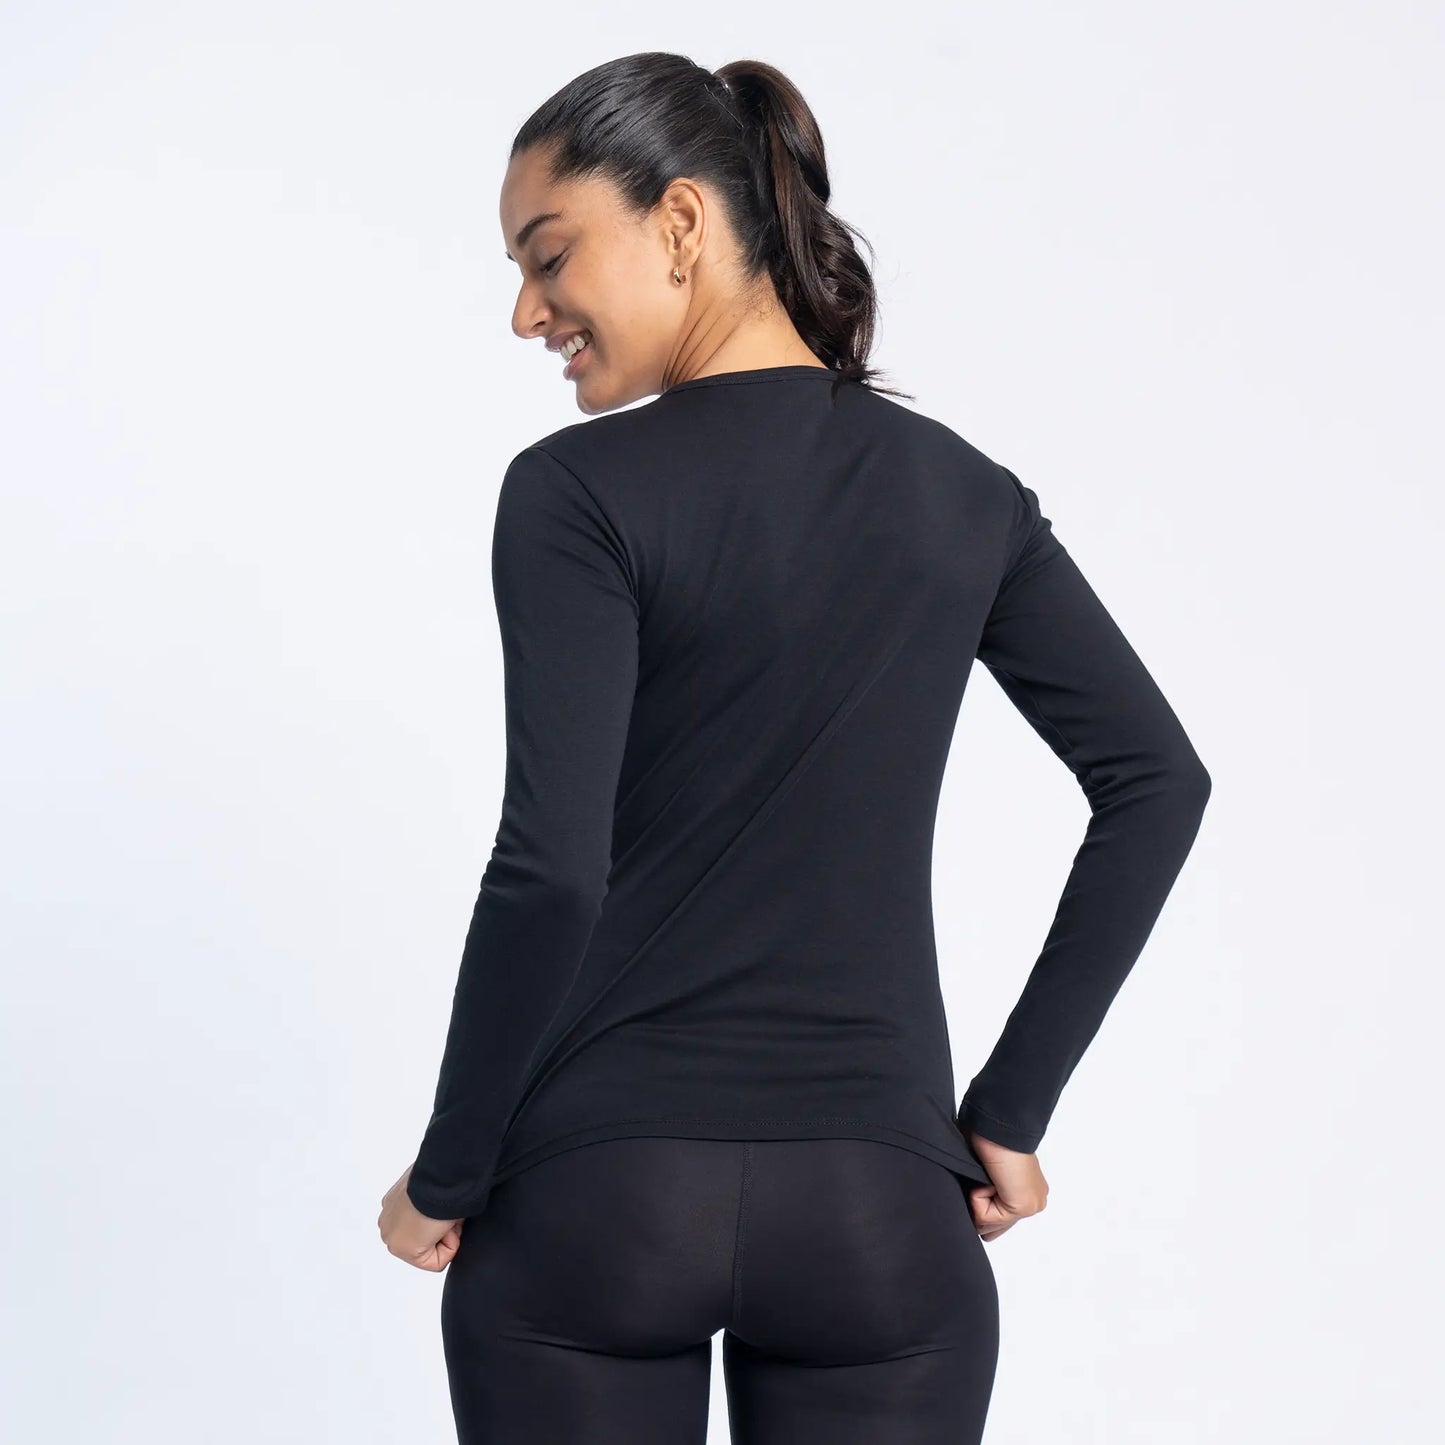 earth's most luxurious long sleeve color black